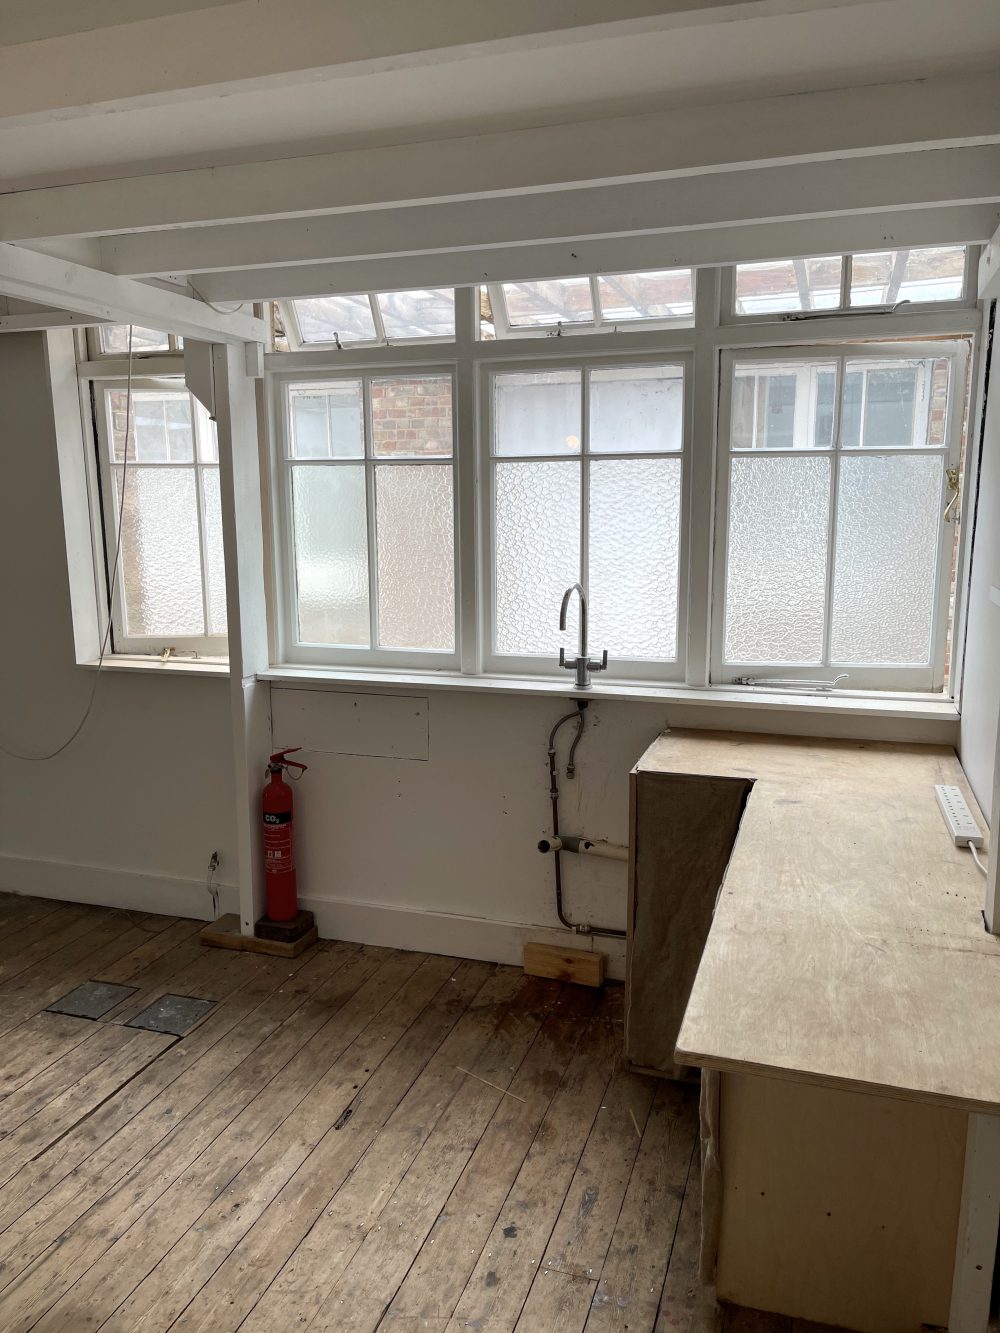 Mezzanine Studio Available to rent in N16 Shelford Place Pic1